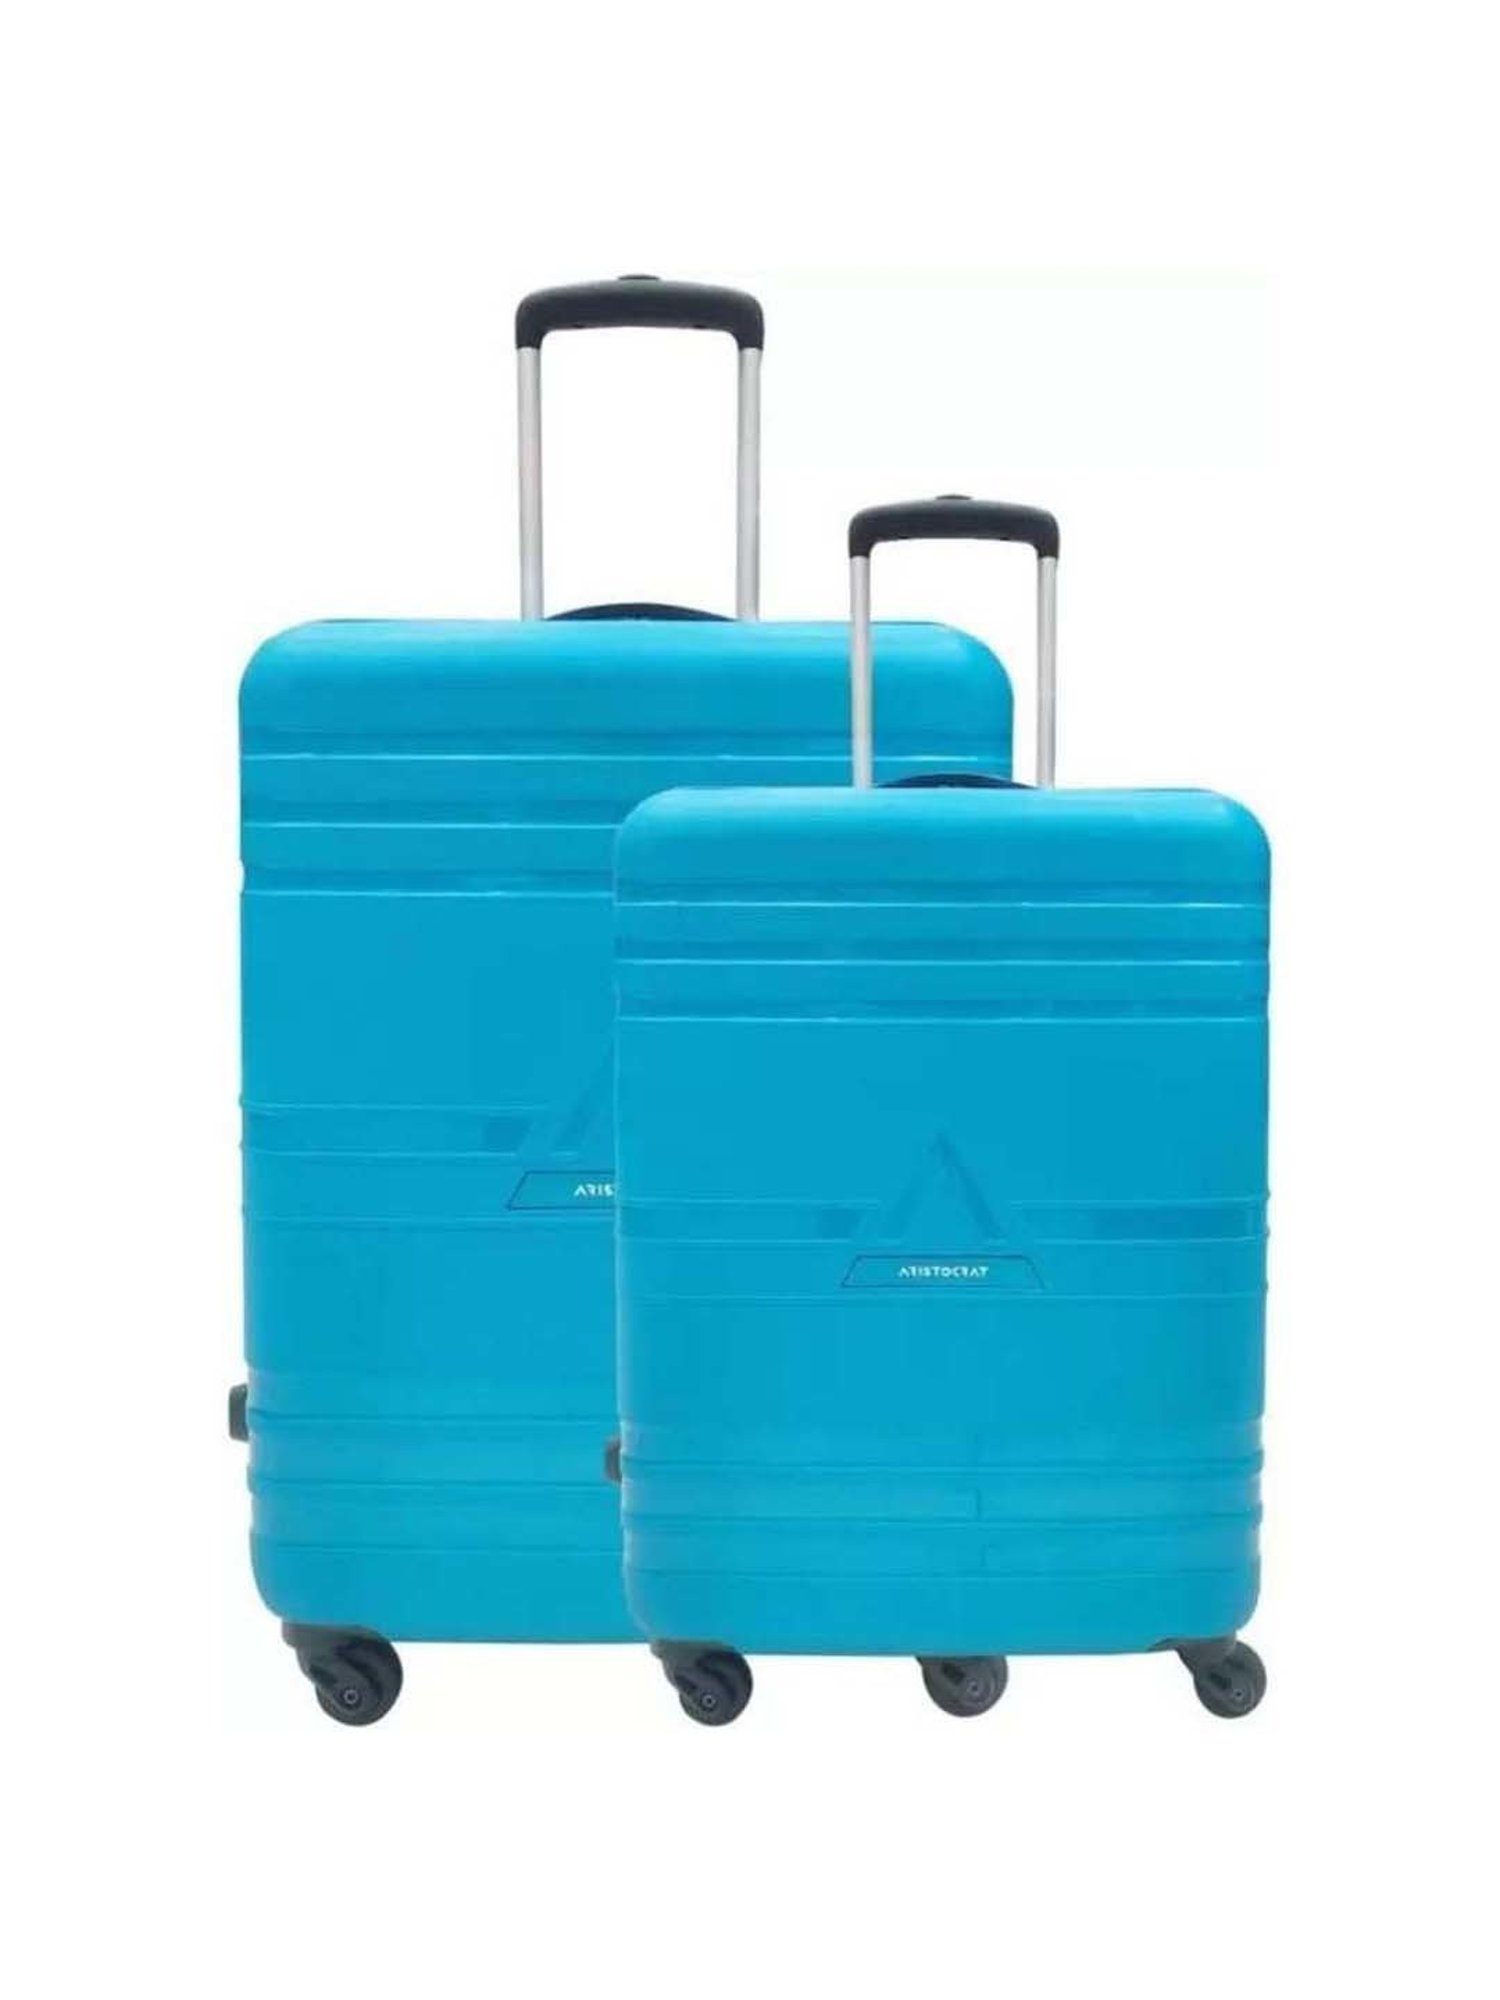 Polyester Rectangular Plain Four Wheel Portable Luggage Trolley Bag Size  28 Inch at Best Price in Ghaziabad  Dhruv Enterprises